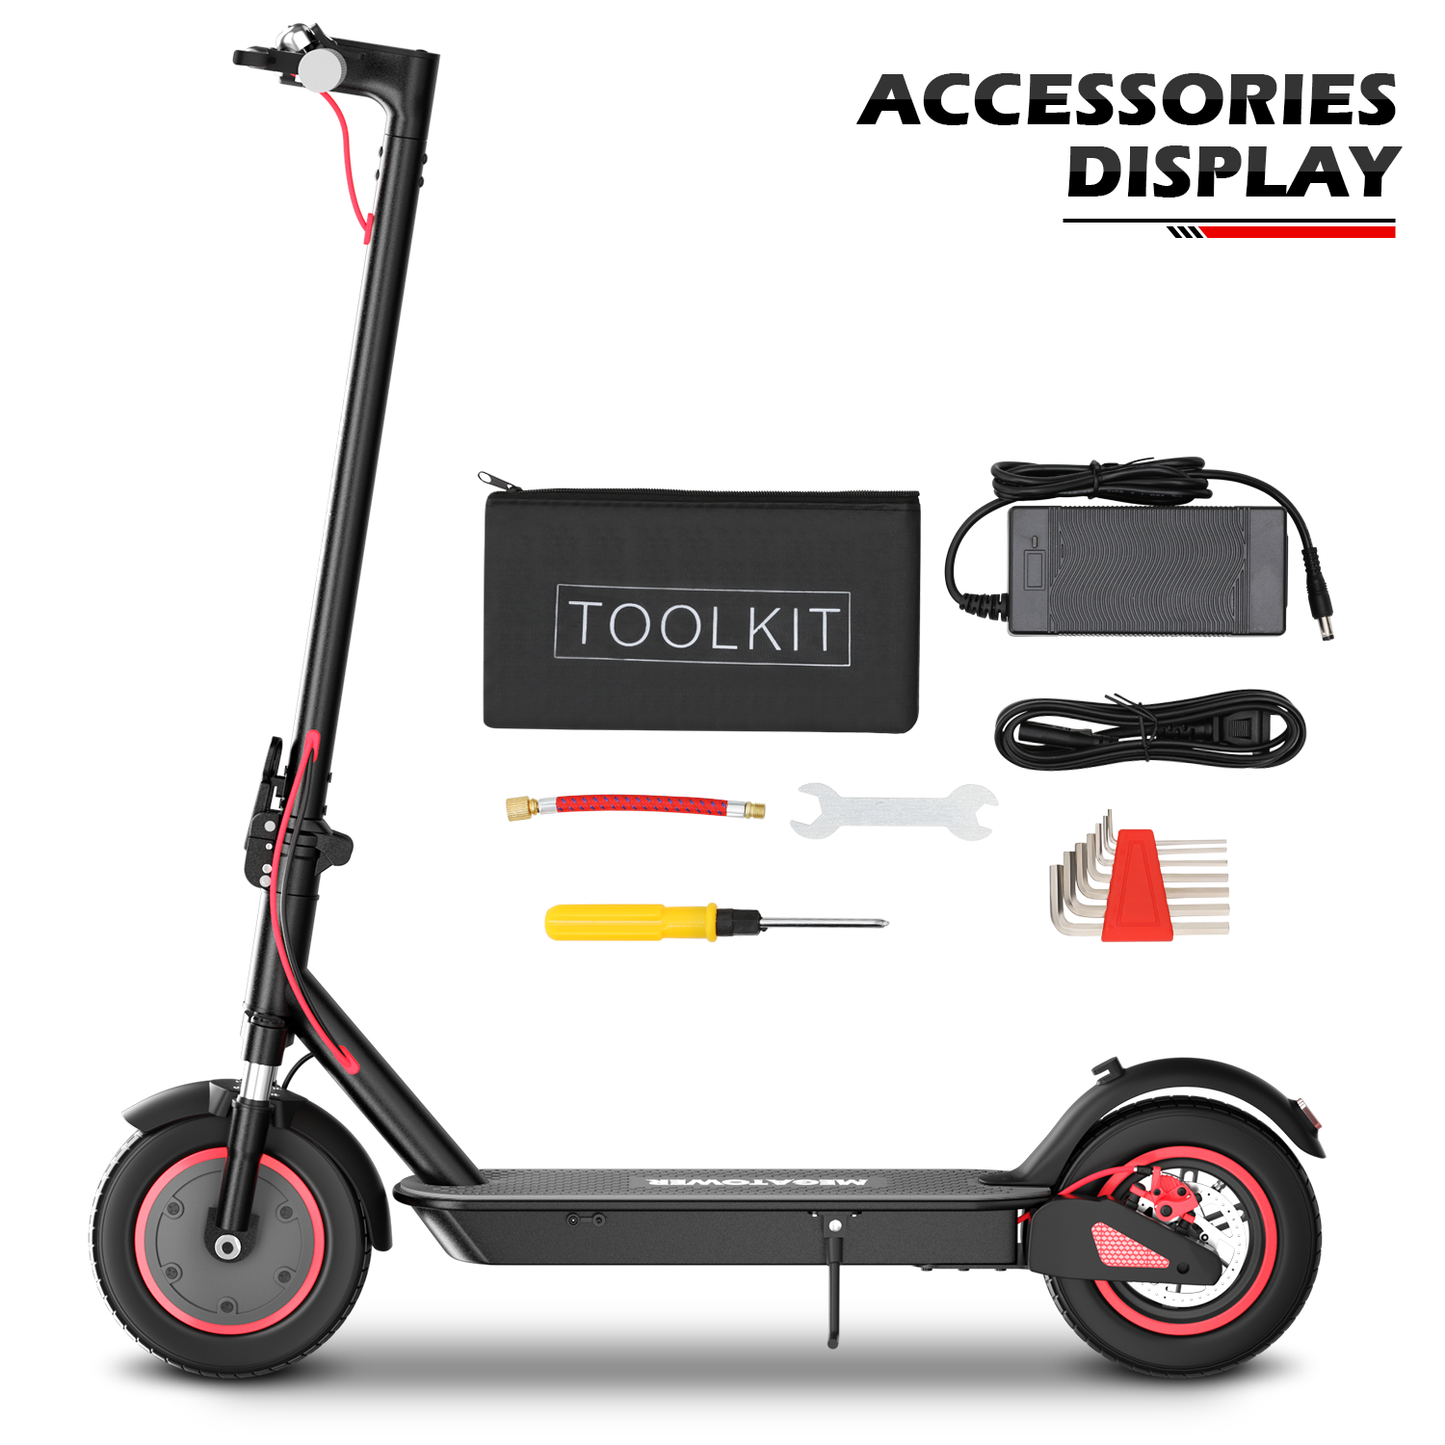 Electric Scooter - 36V, 5.2A, Black